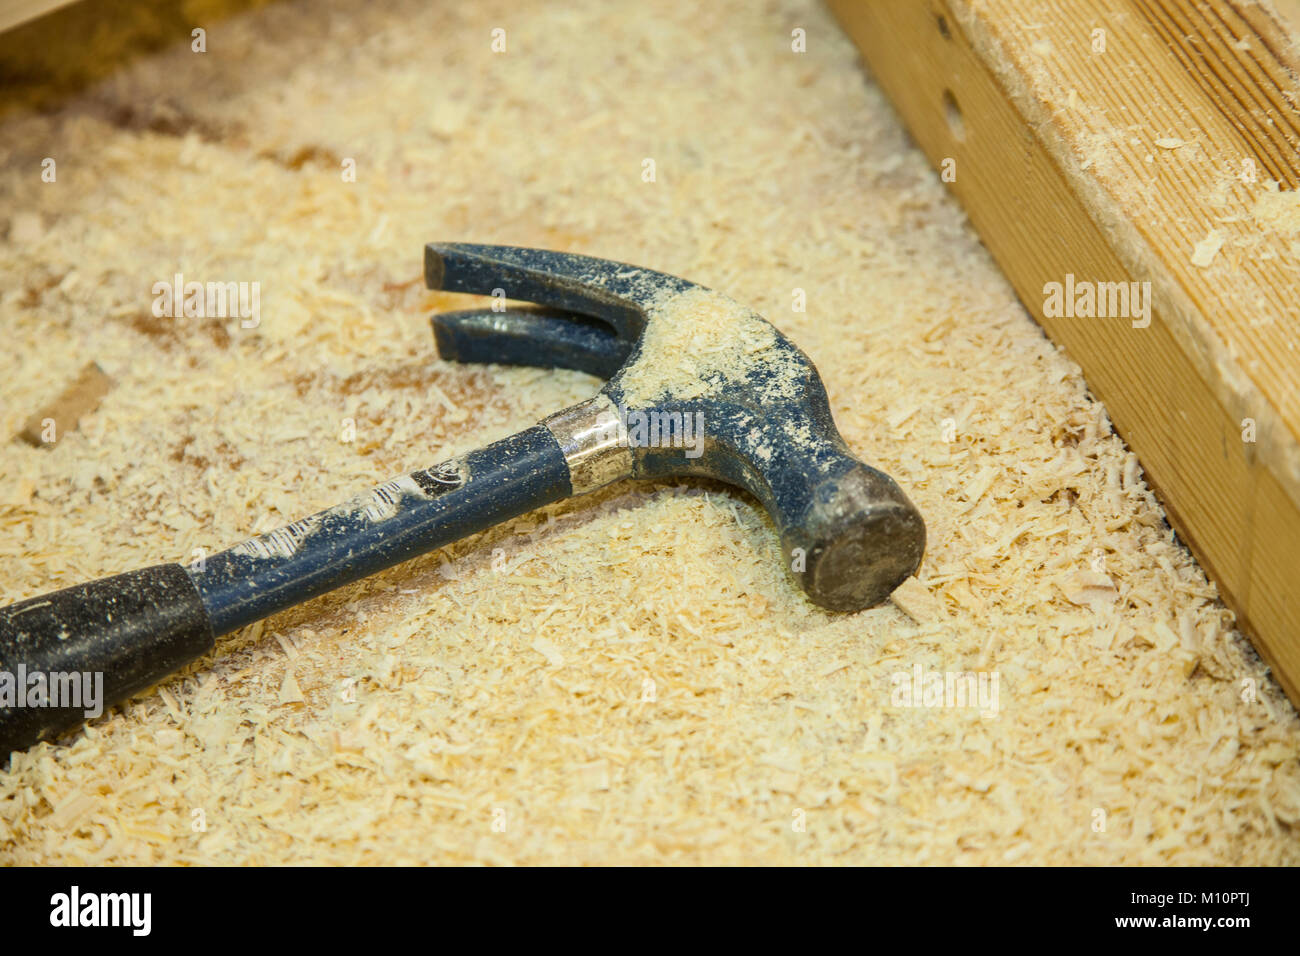 A claw hammer in wood shavings on a work bench. Stock Photo